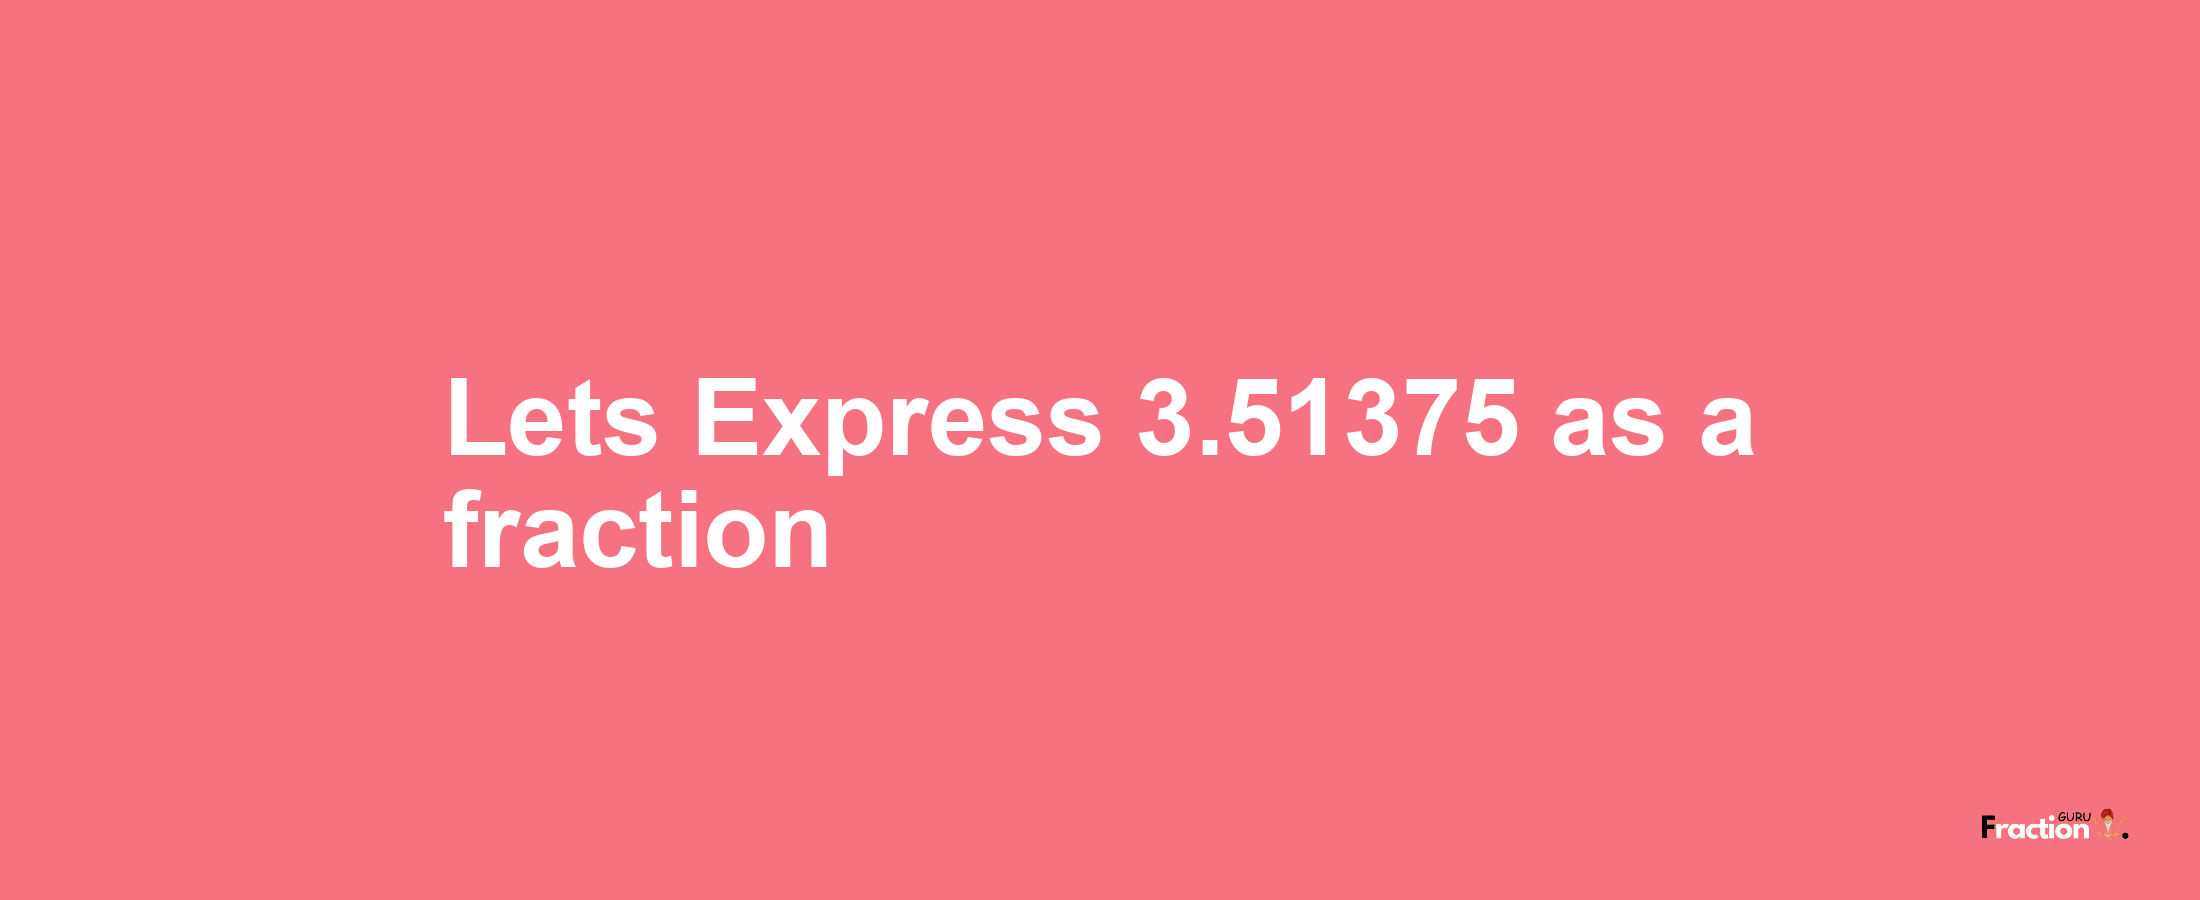 Lets Express 3.51375 as afraction